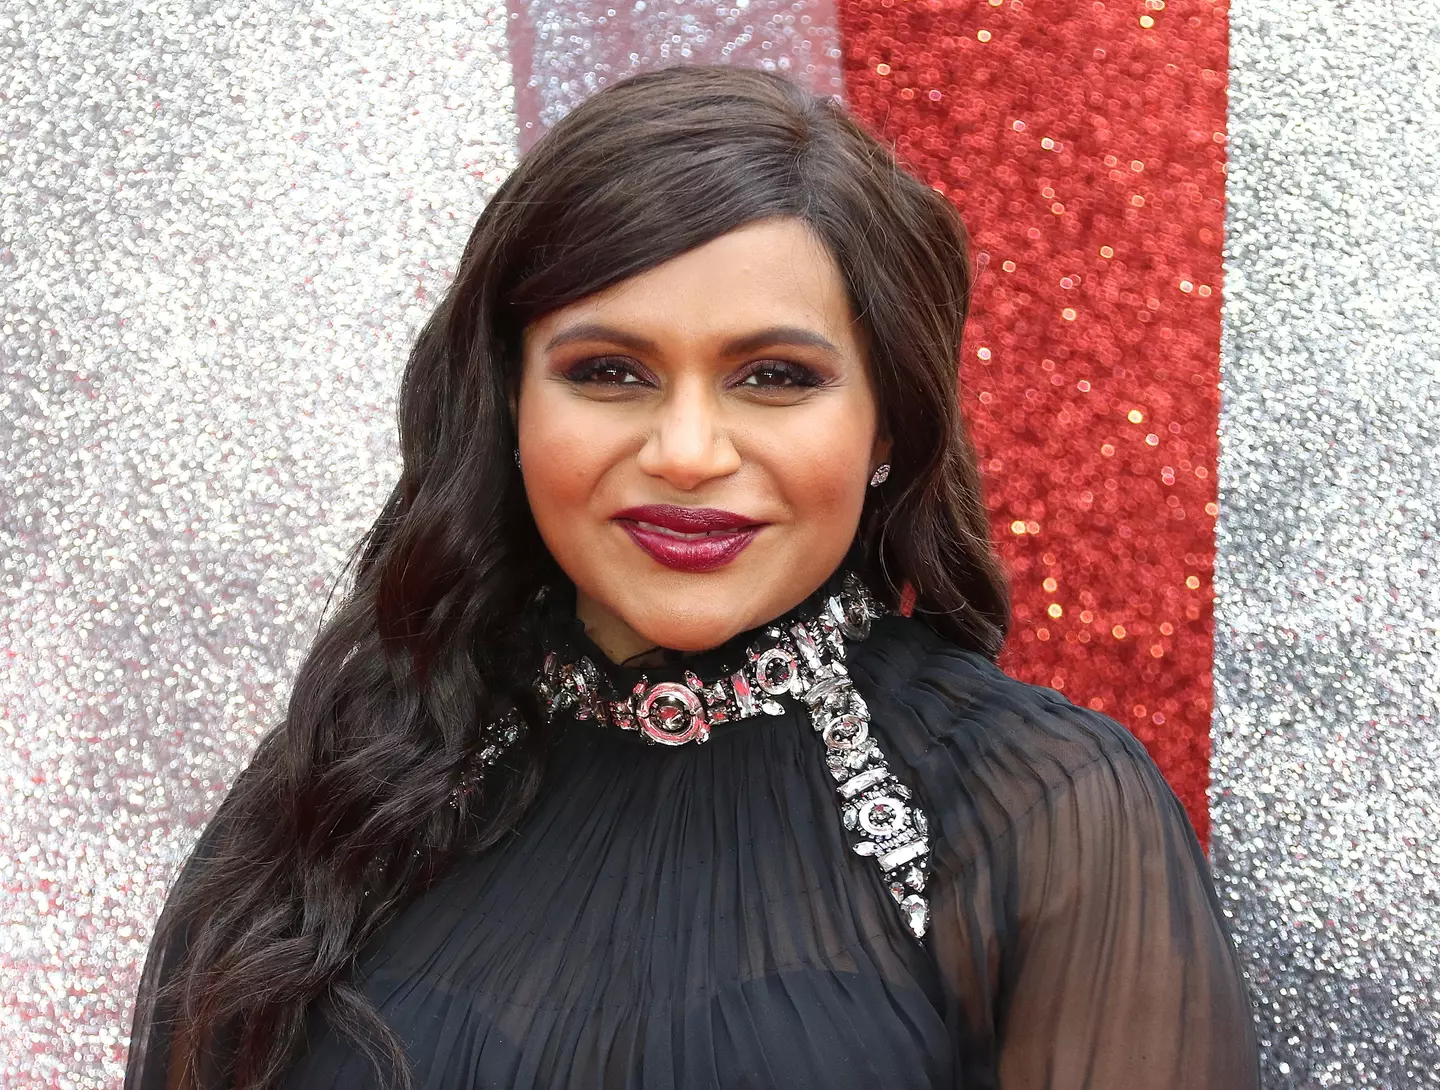 Mindy Kaling opened up about the decision to reimagine Velma as a South Asian girl.